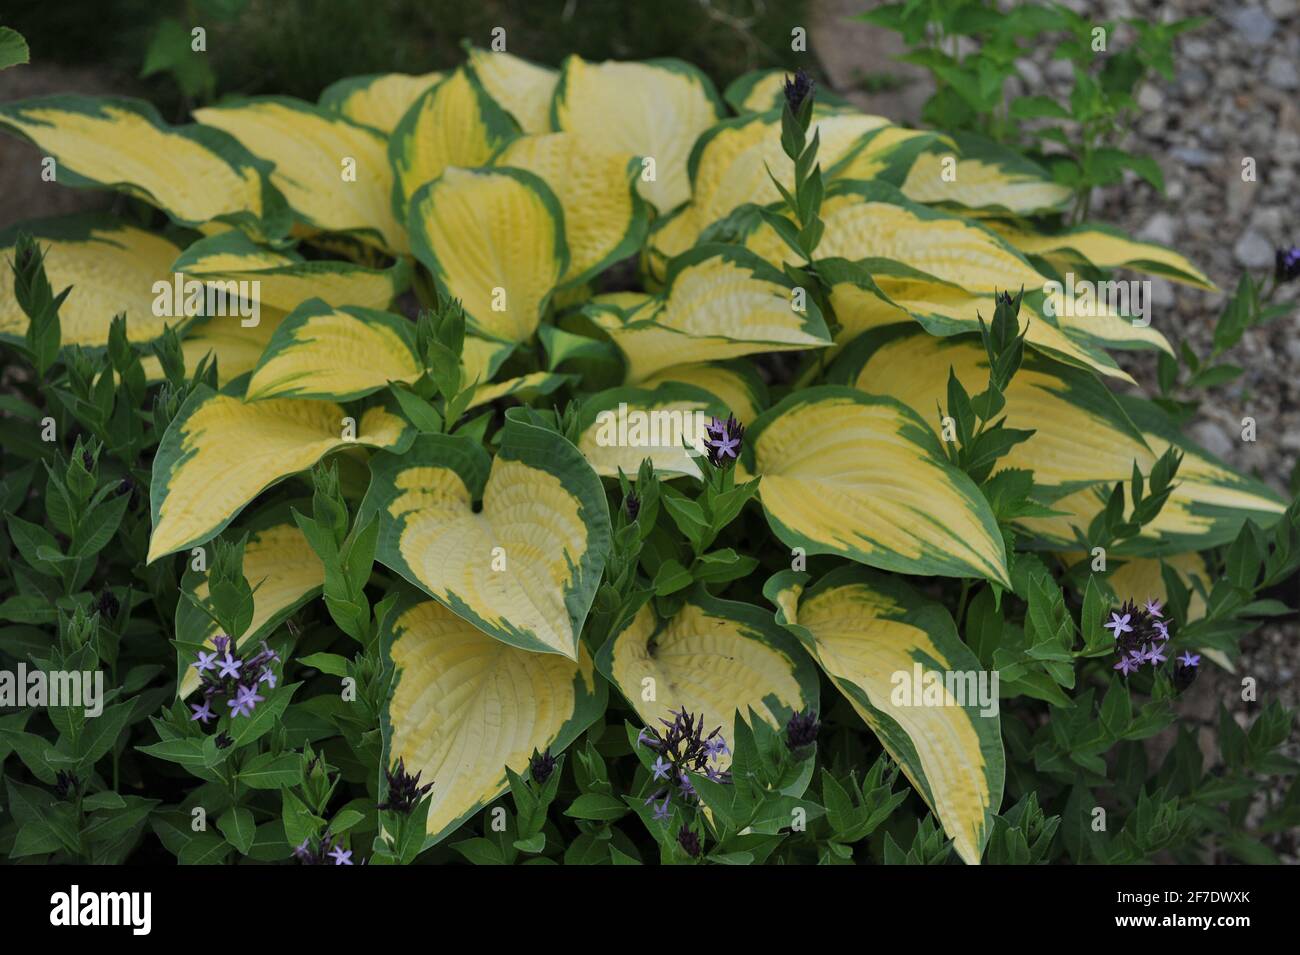 Variegated Hosta Orange Marmalade with yellow-green foliage grows together with European bluestar (Amsonia orientalis) in a flower border in a garden Stock Photo